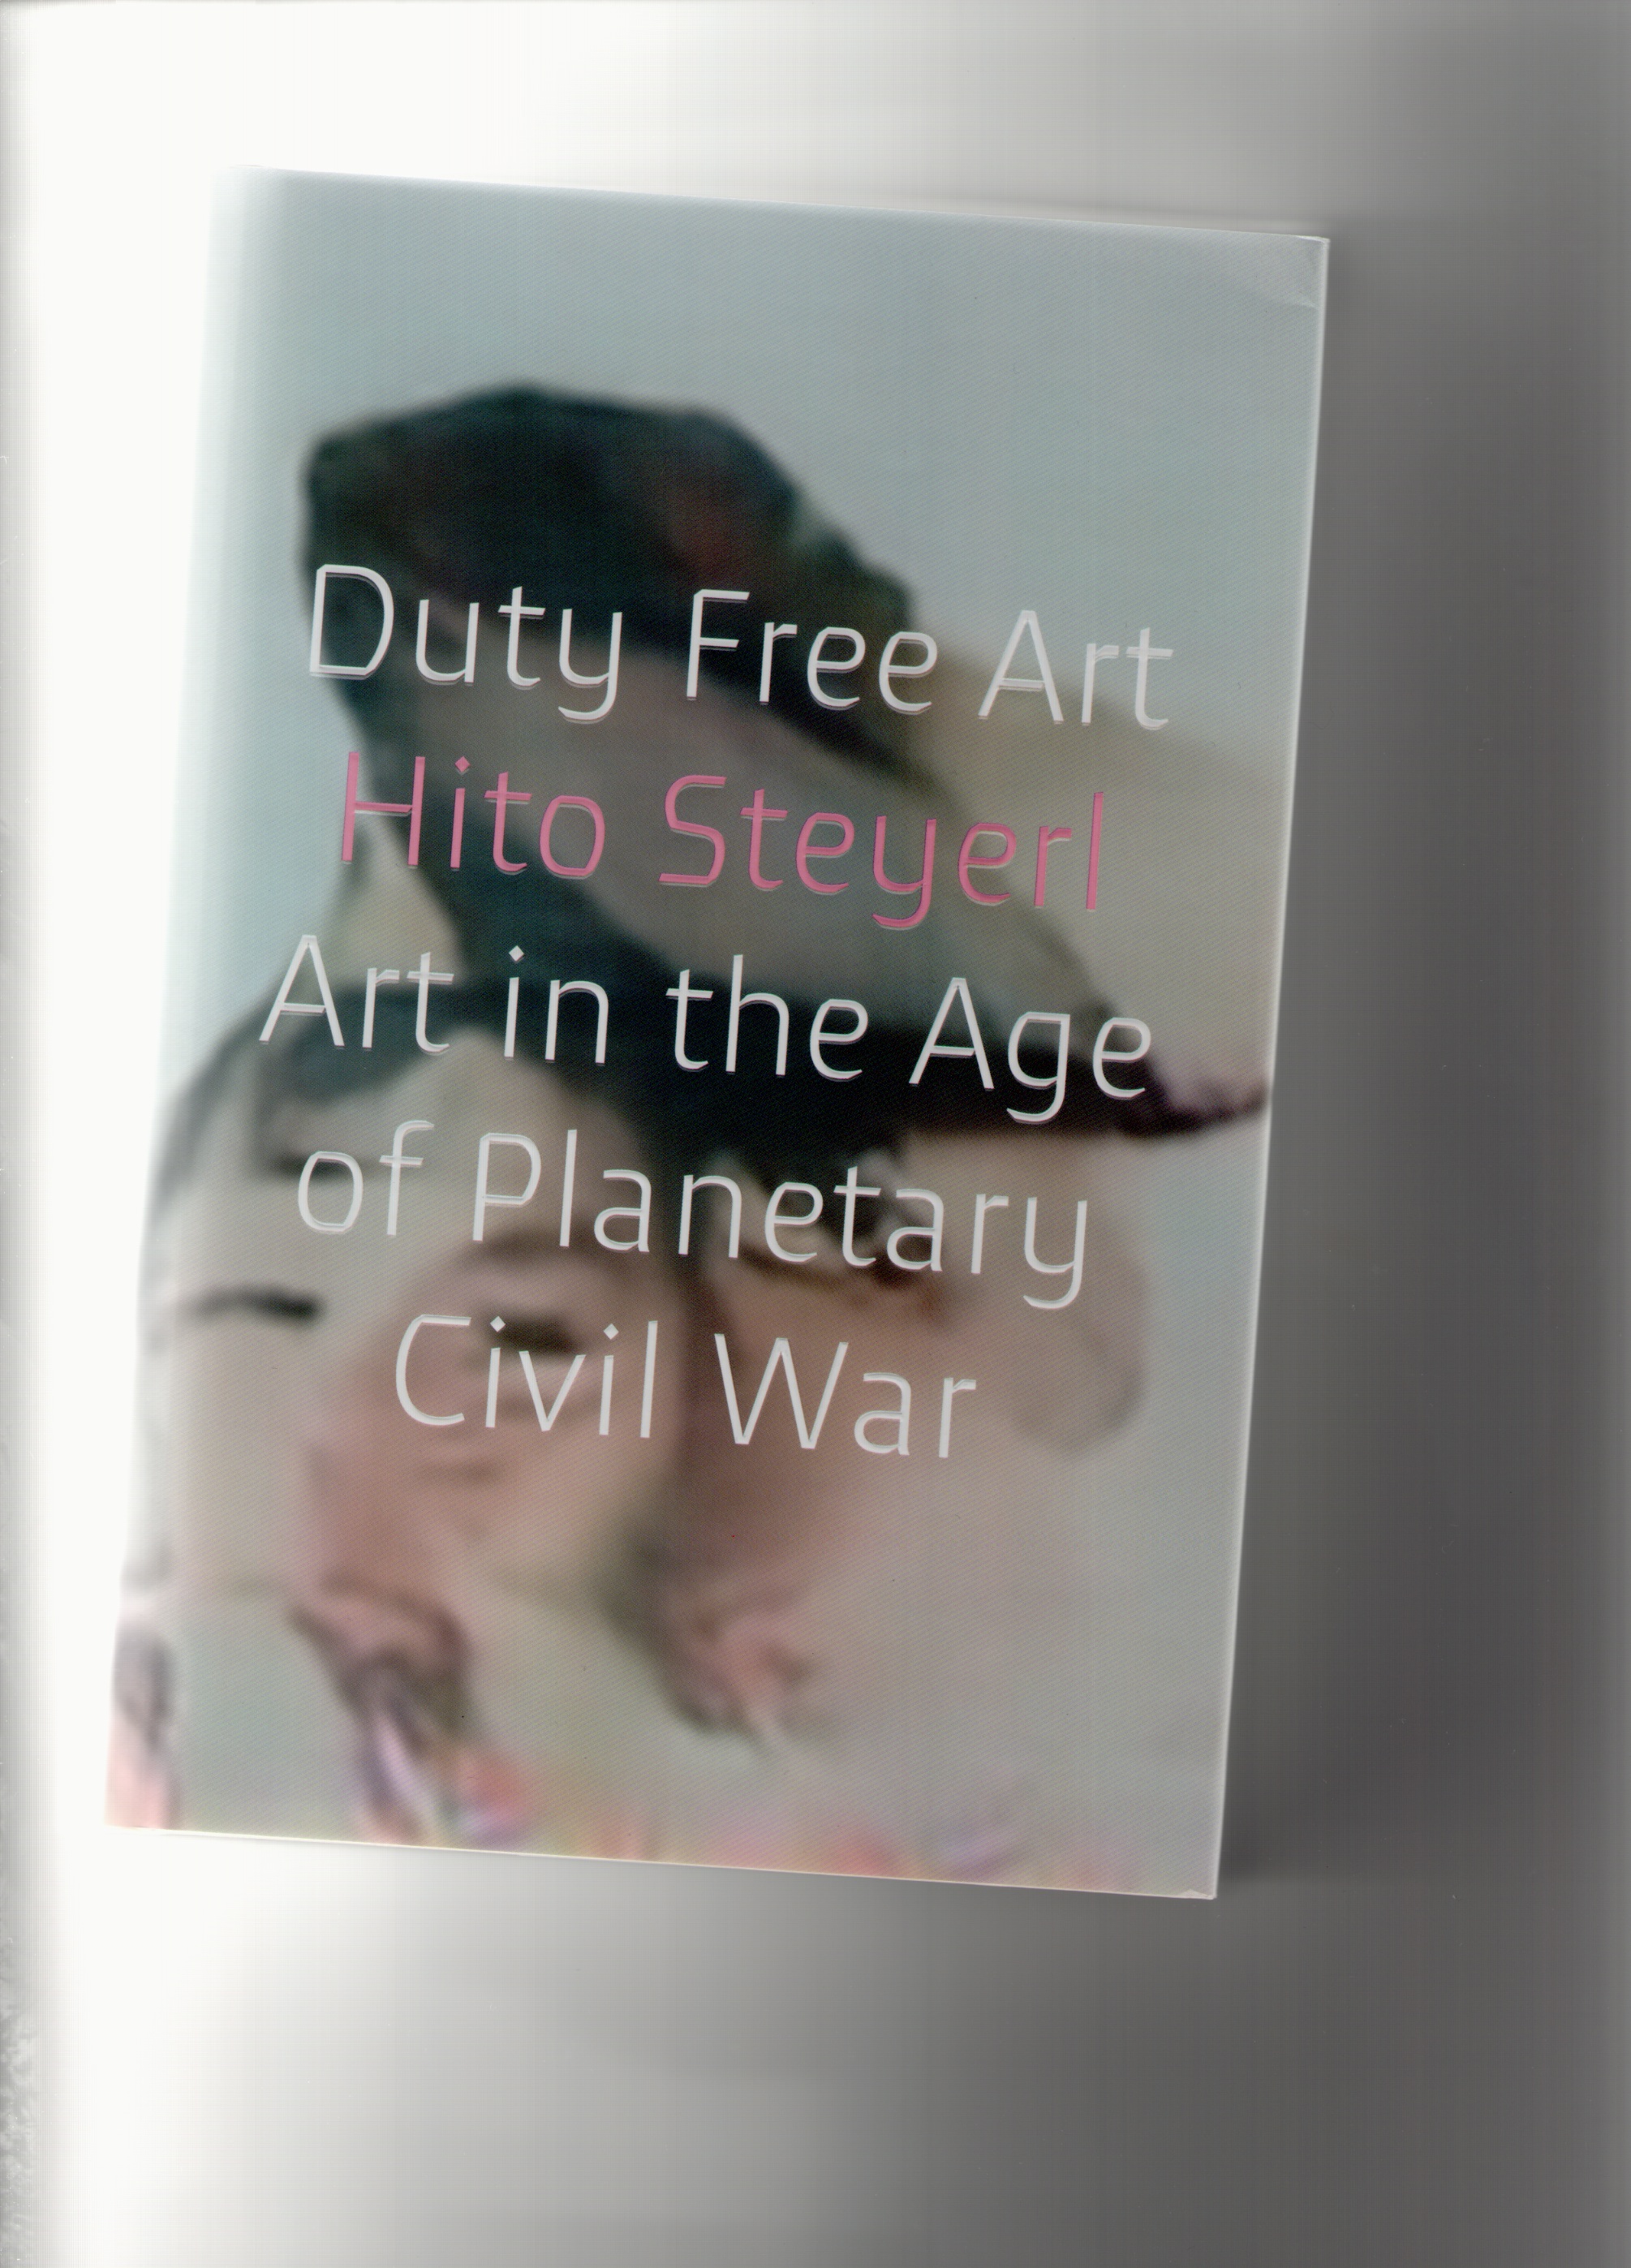 STEYERL, Hito - Duty Free Art. Art in the Age of Planetary Civil War